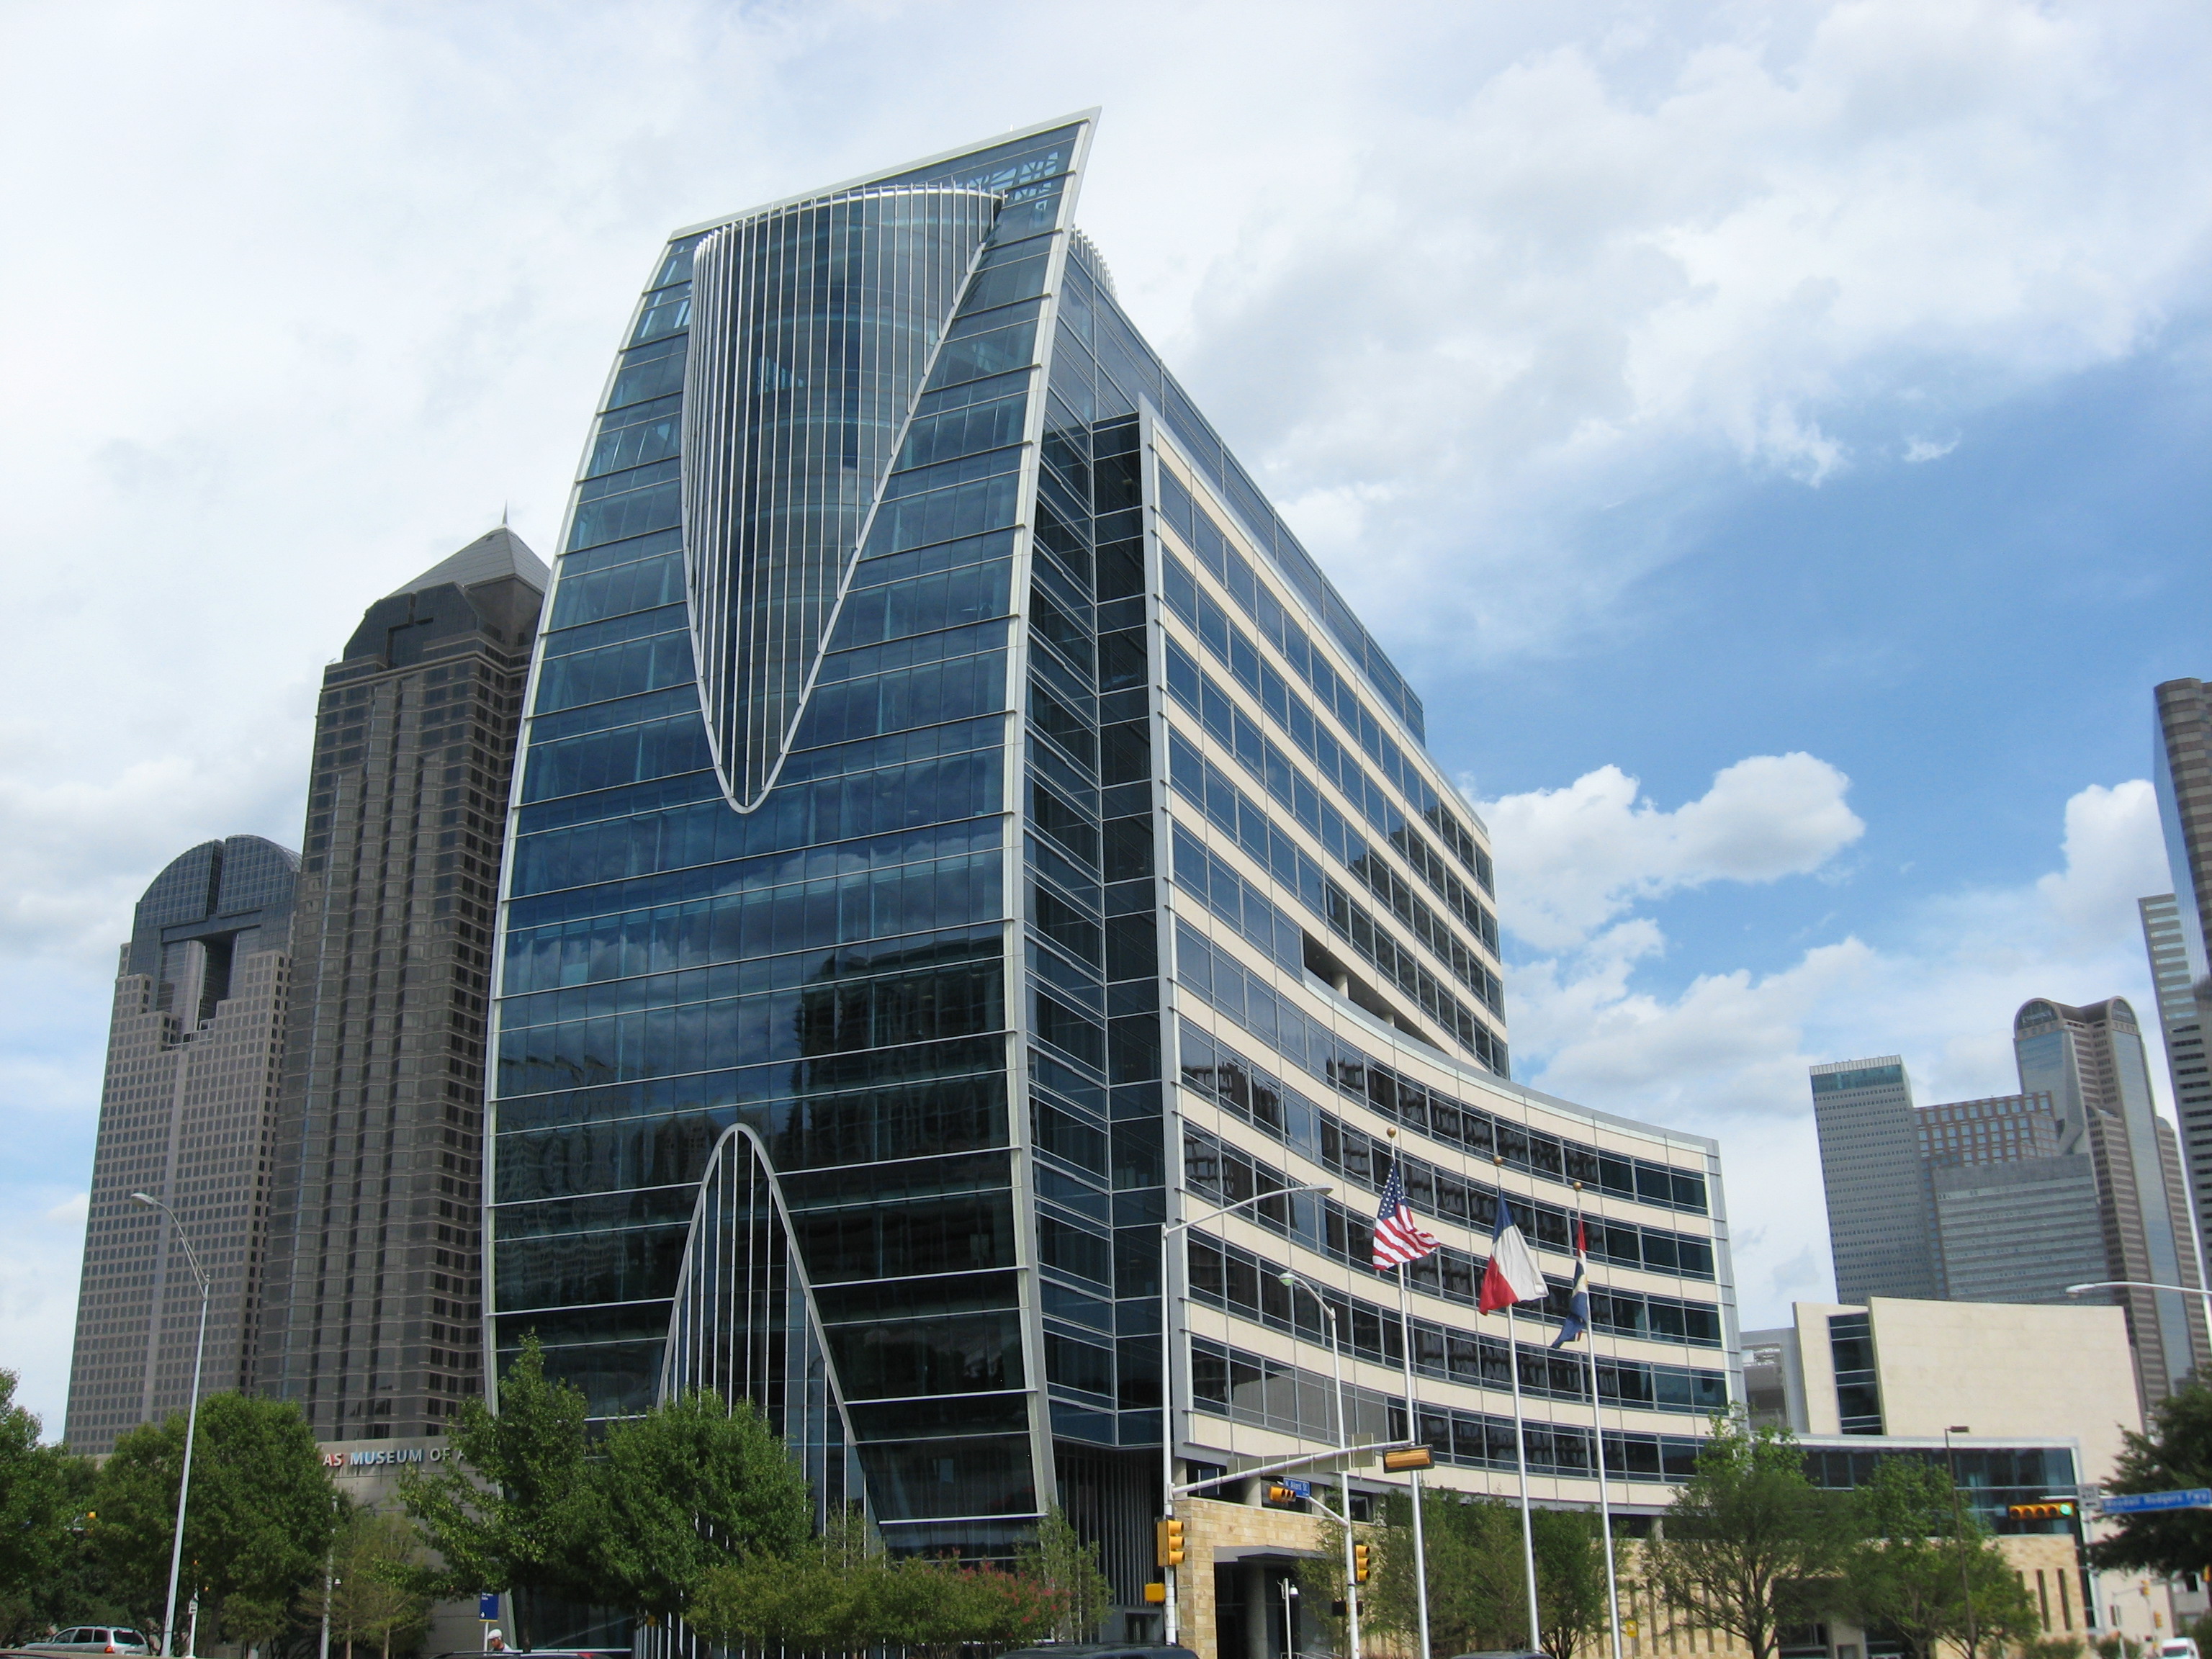 The new Hunt Oil Tower in Downtown Dallas.